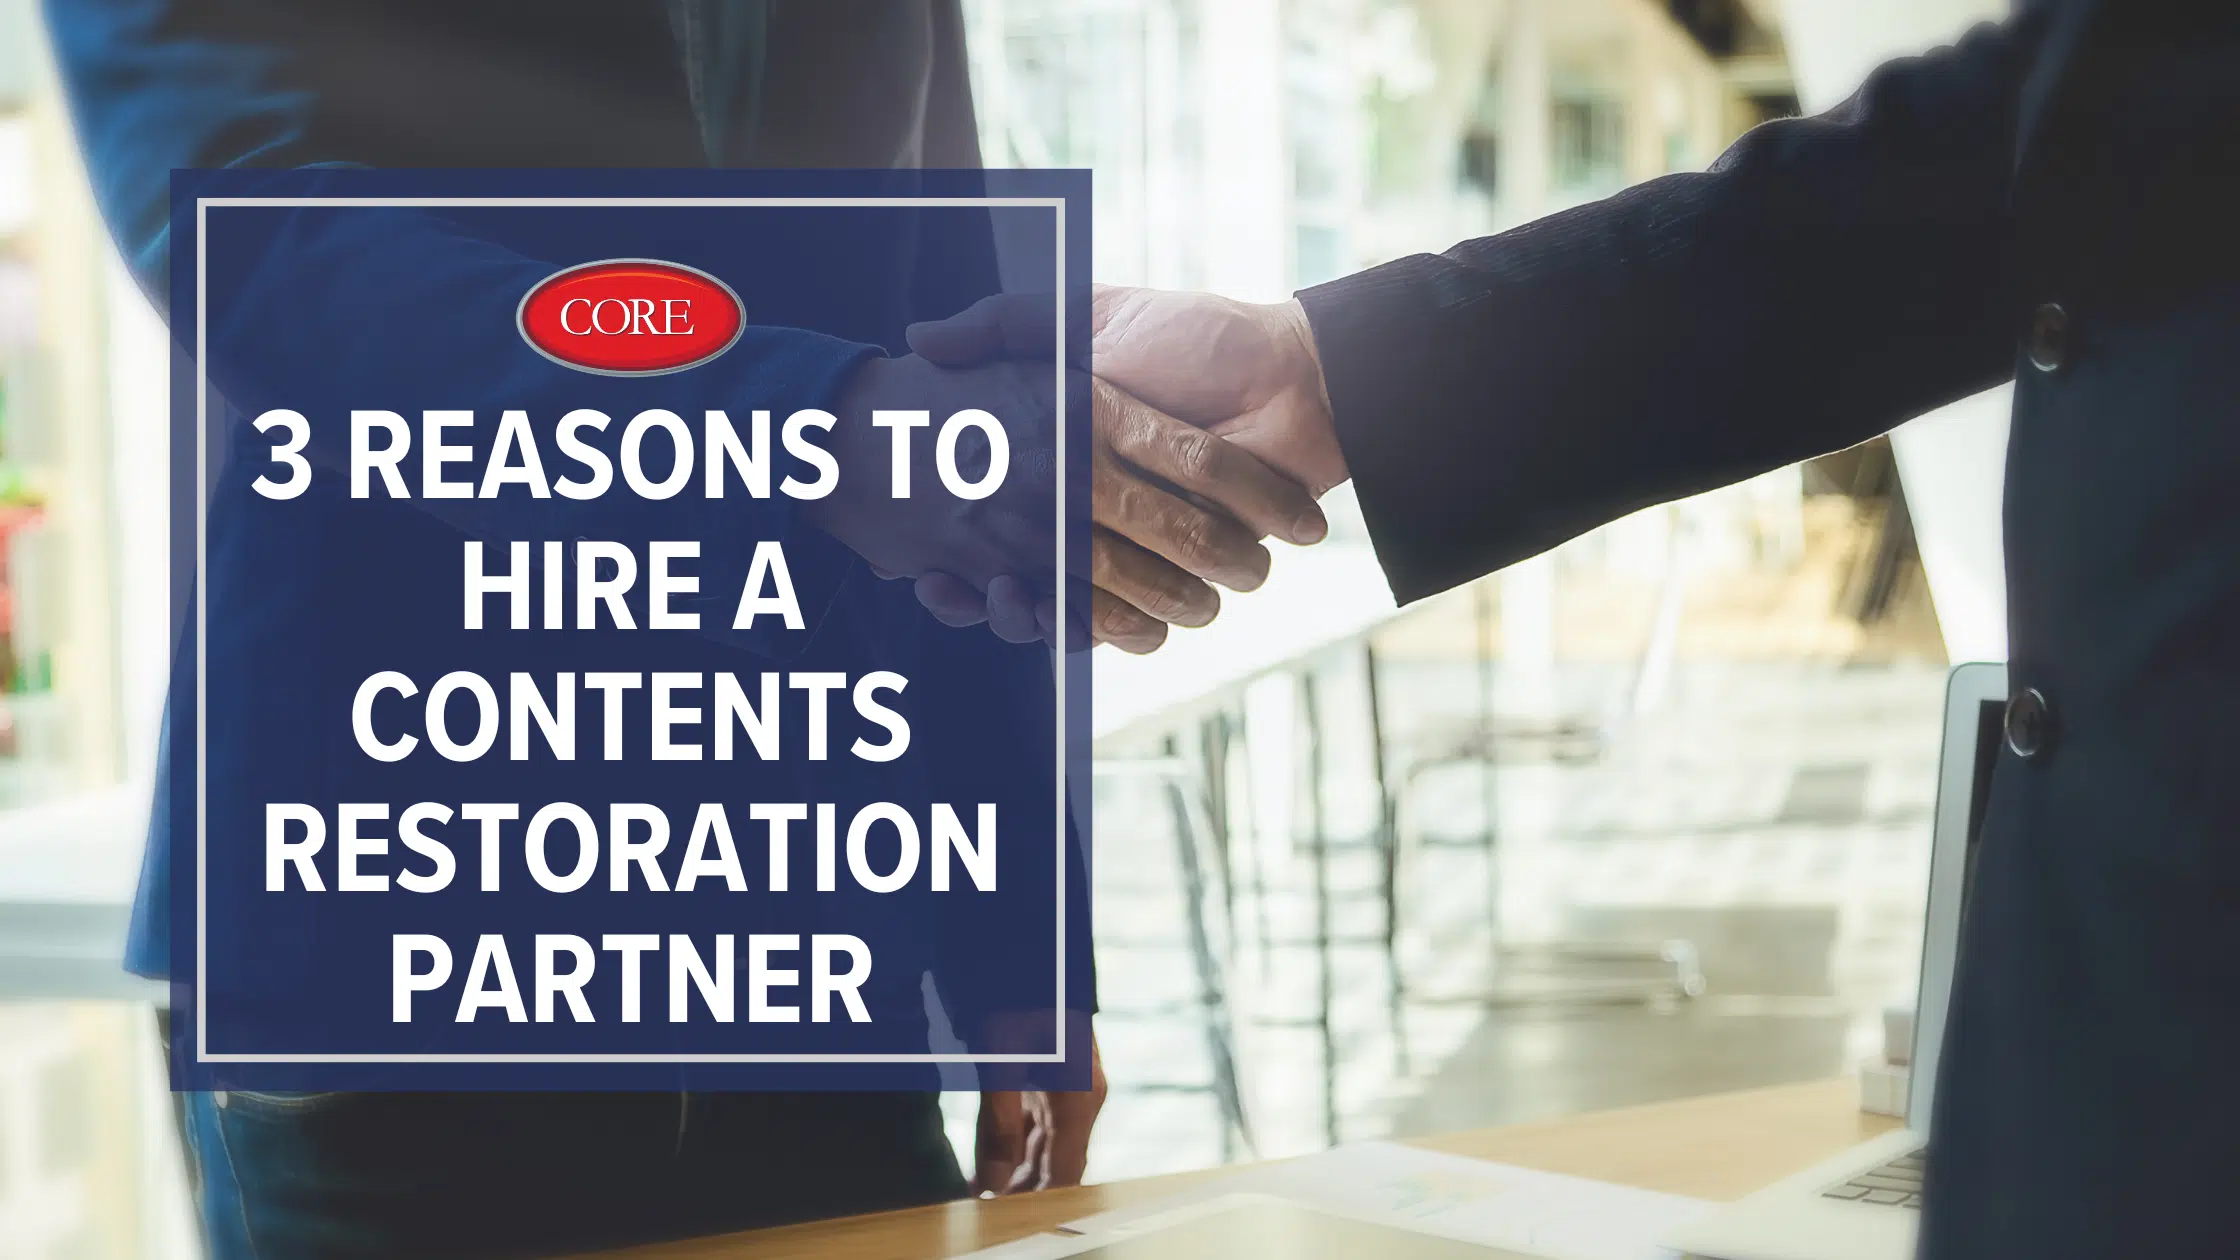 3 Reasons to Hire a Contents Restoration Partner